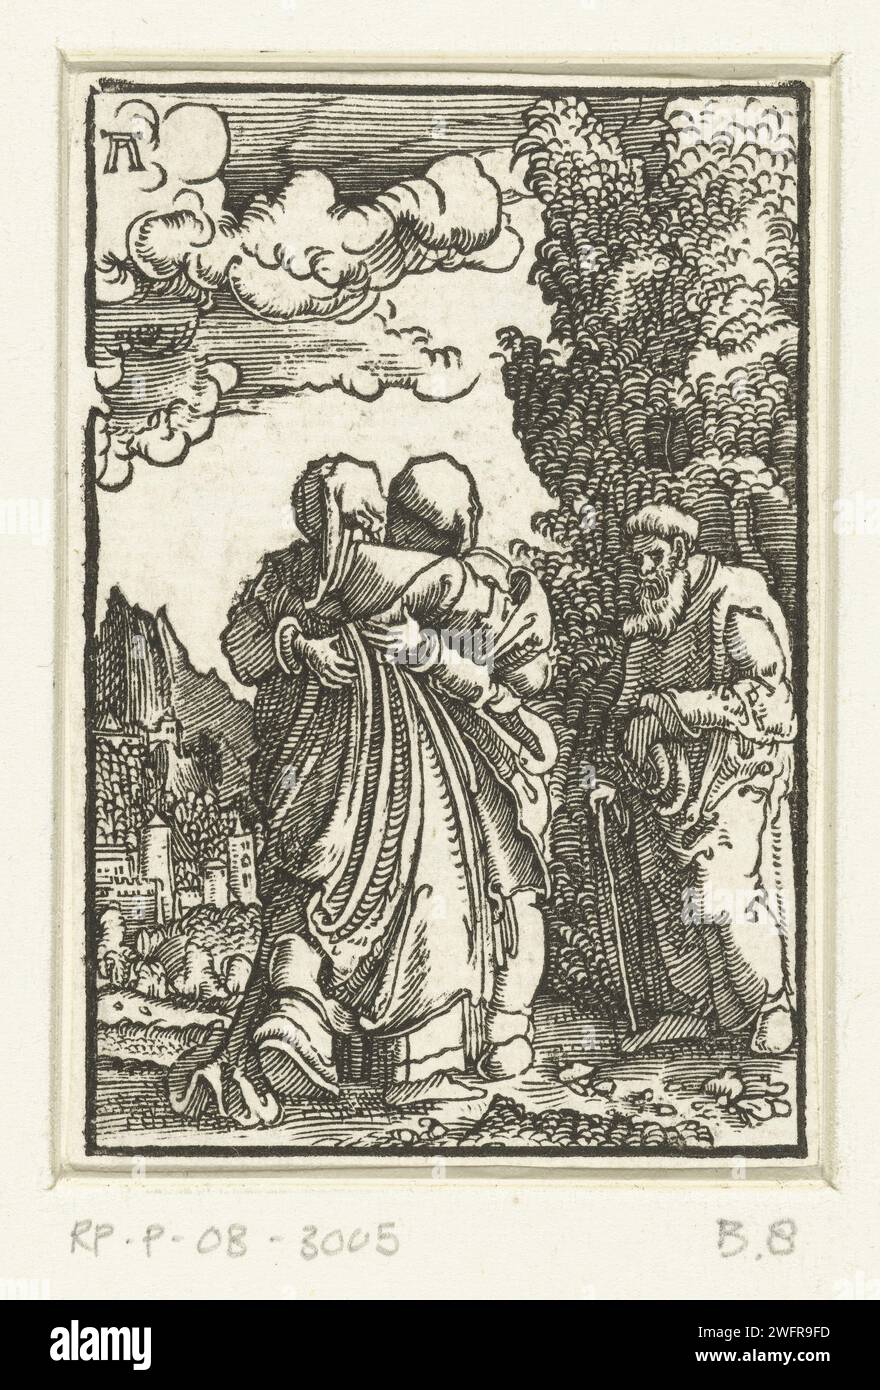 Visitation, Albrecht Altdorfer, c. 1506 - 1538 print Maria and Elisabeth embrace each other, Joseph watches. Eighth print from a series of forty. Germany paper  Visitation (possibly Joseph and/or Zacharias present) (Luke 1:39-56) Stock Photo